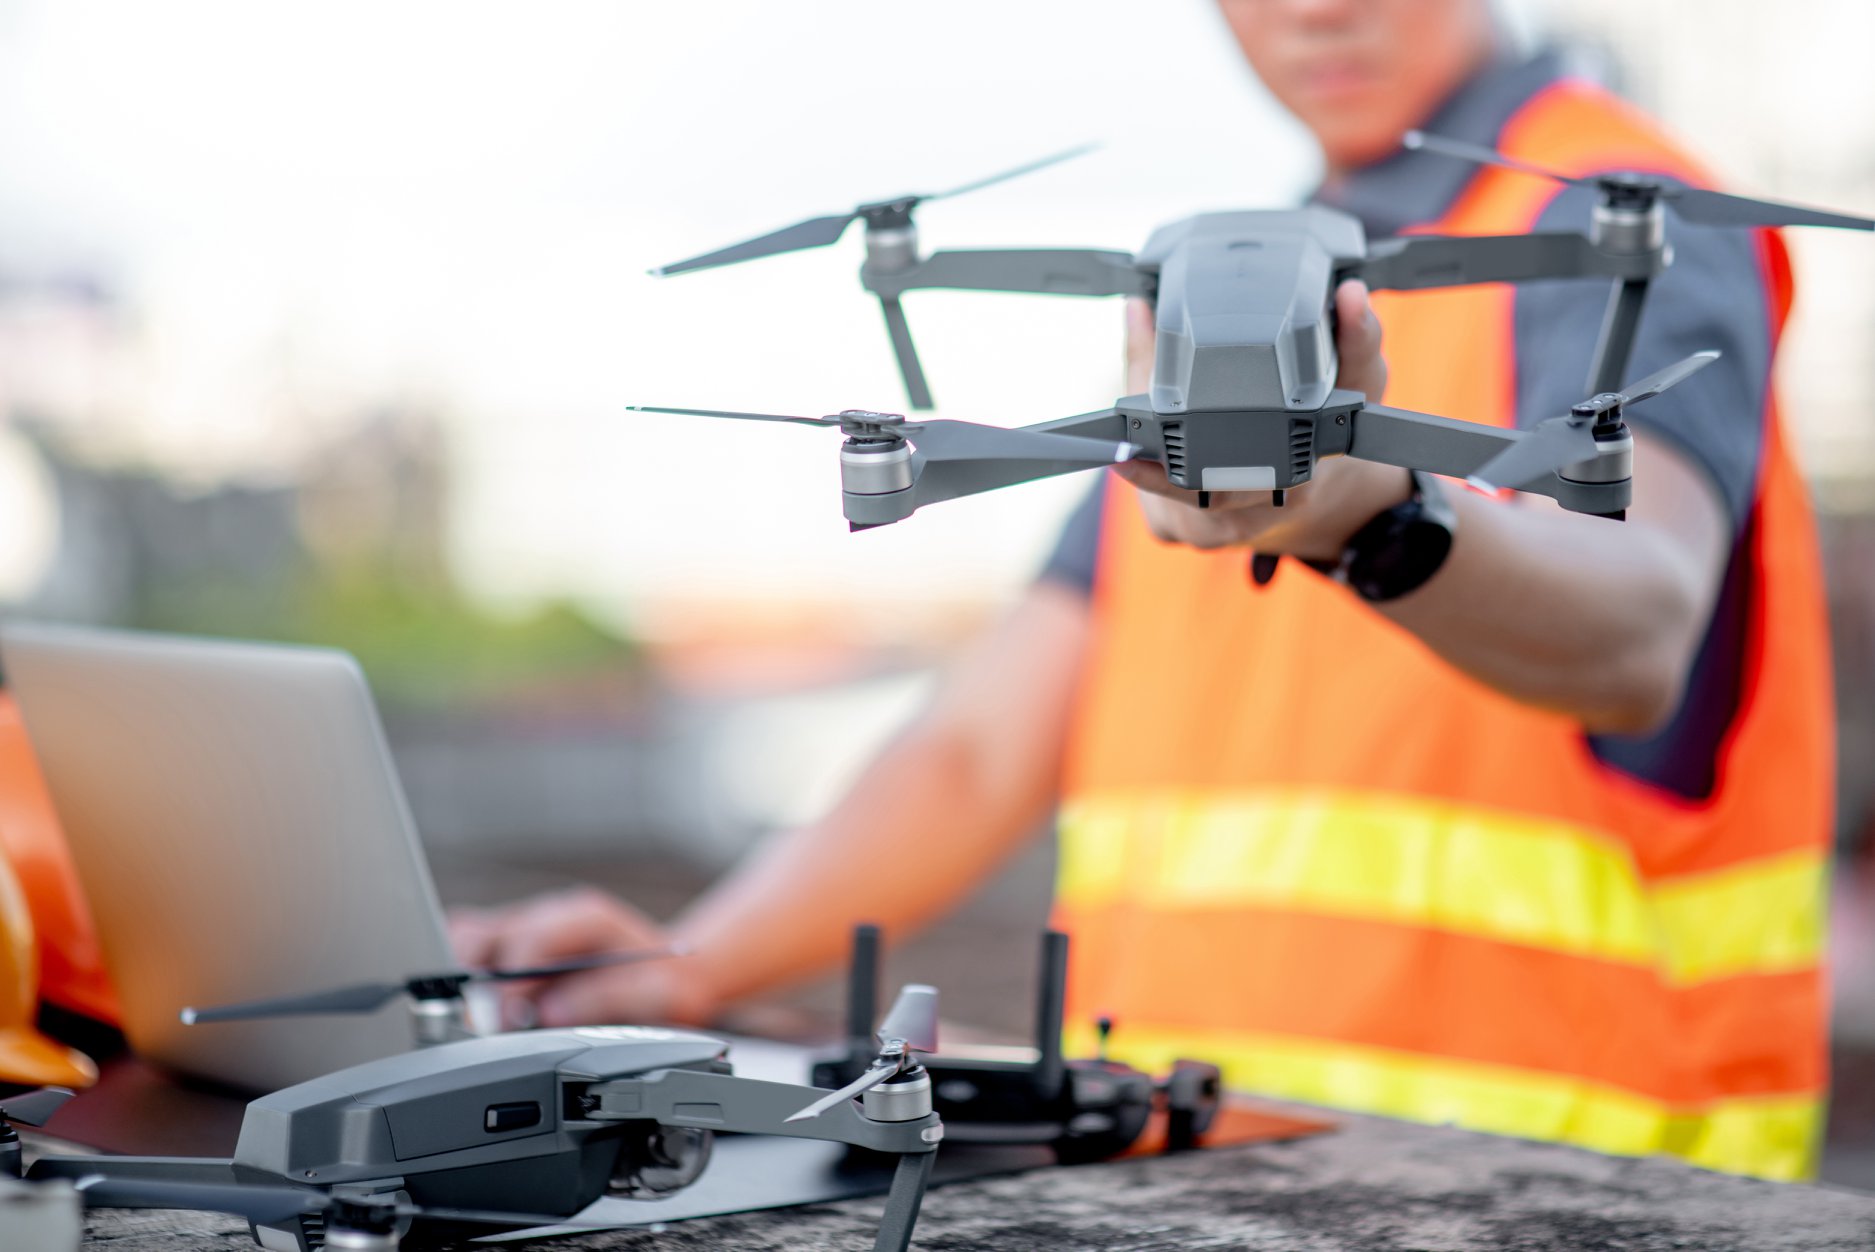 Commercial Drone Market Trends 2022 and Beyond